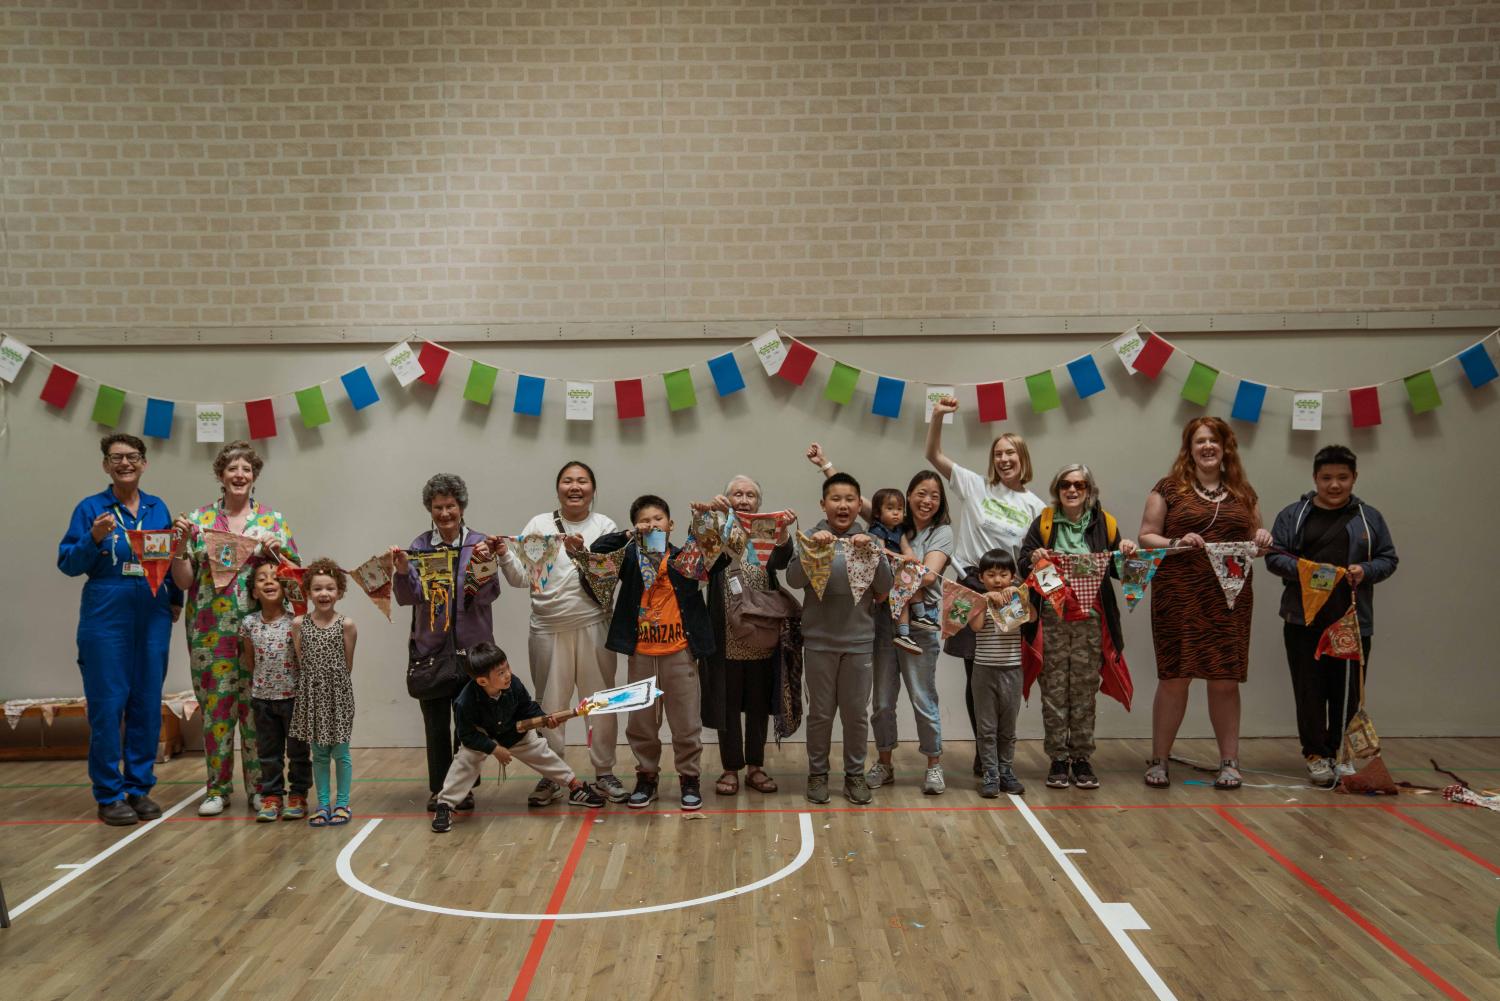 A group stand with their homemade recycled bunting in a sports hall